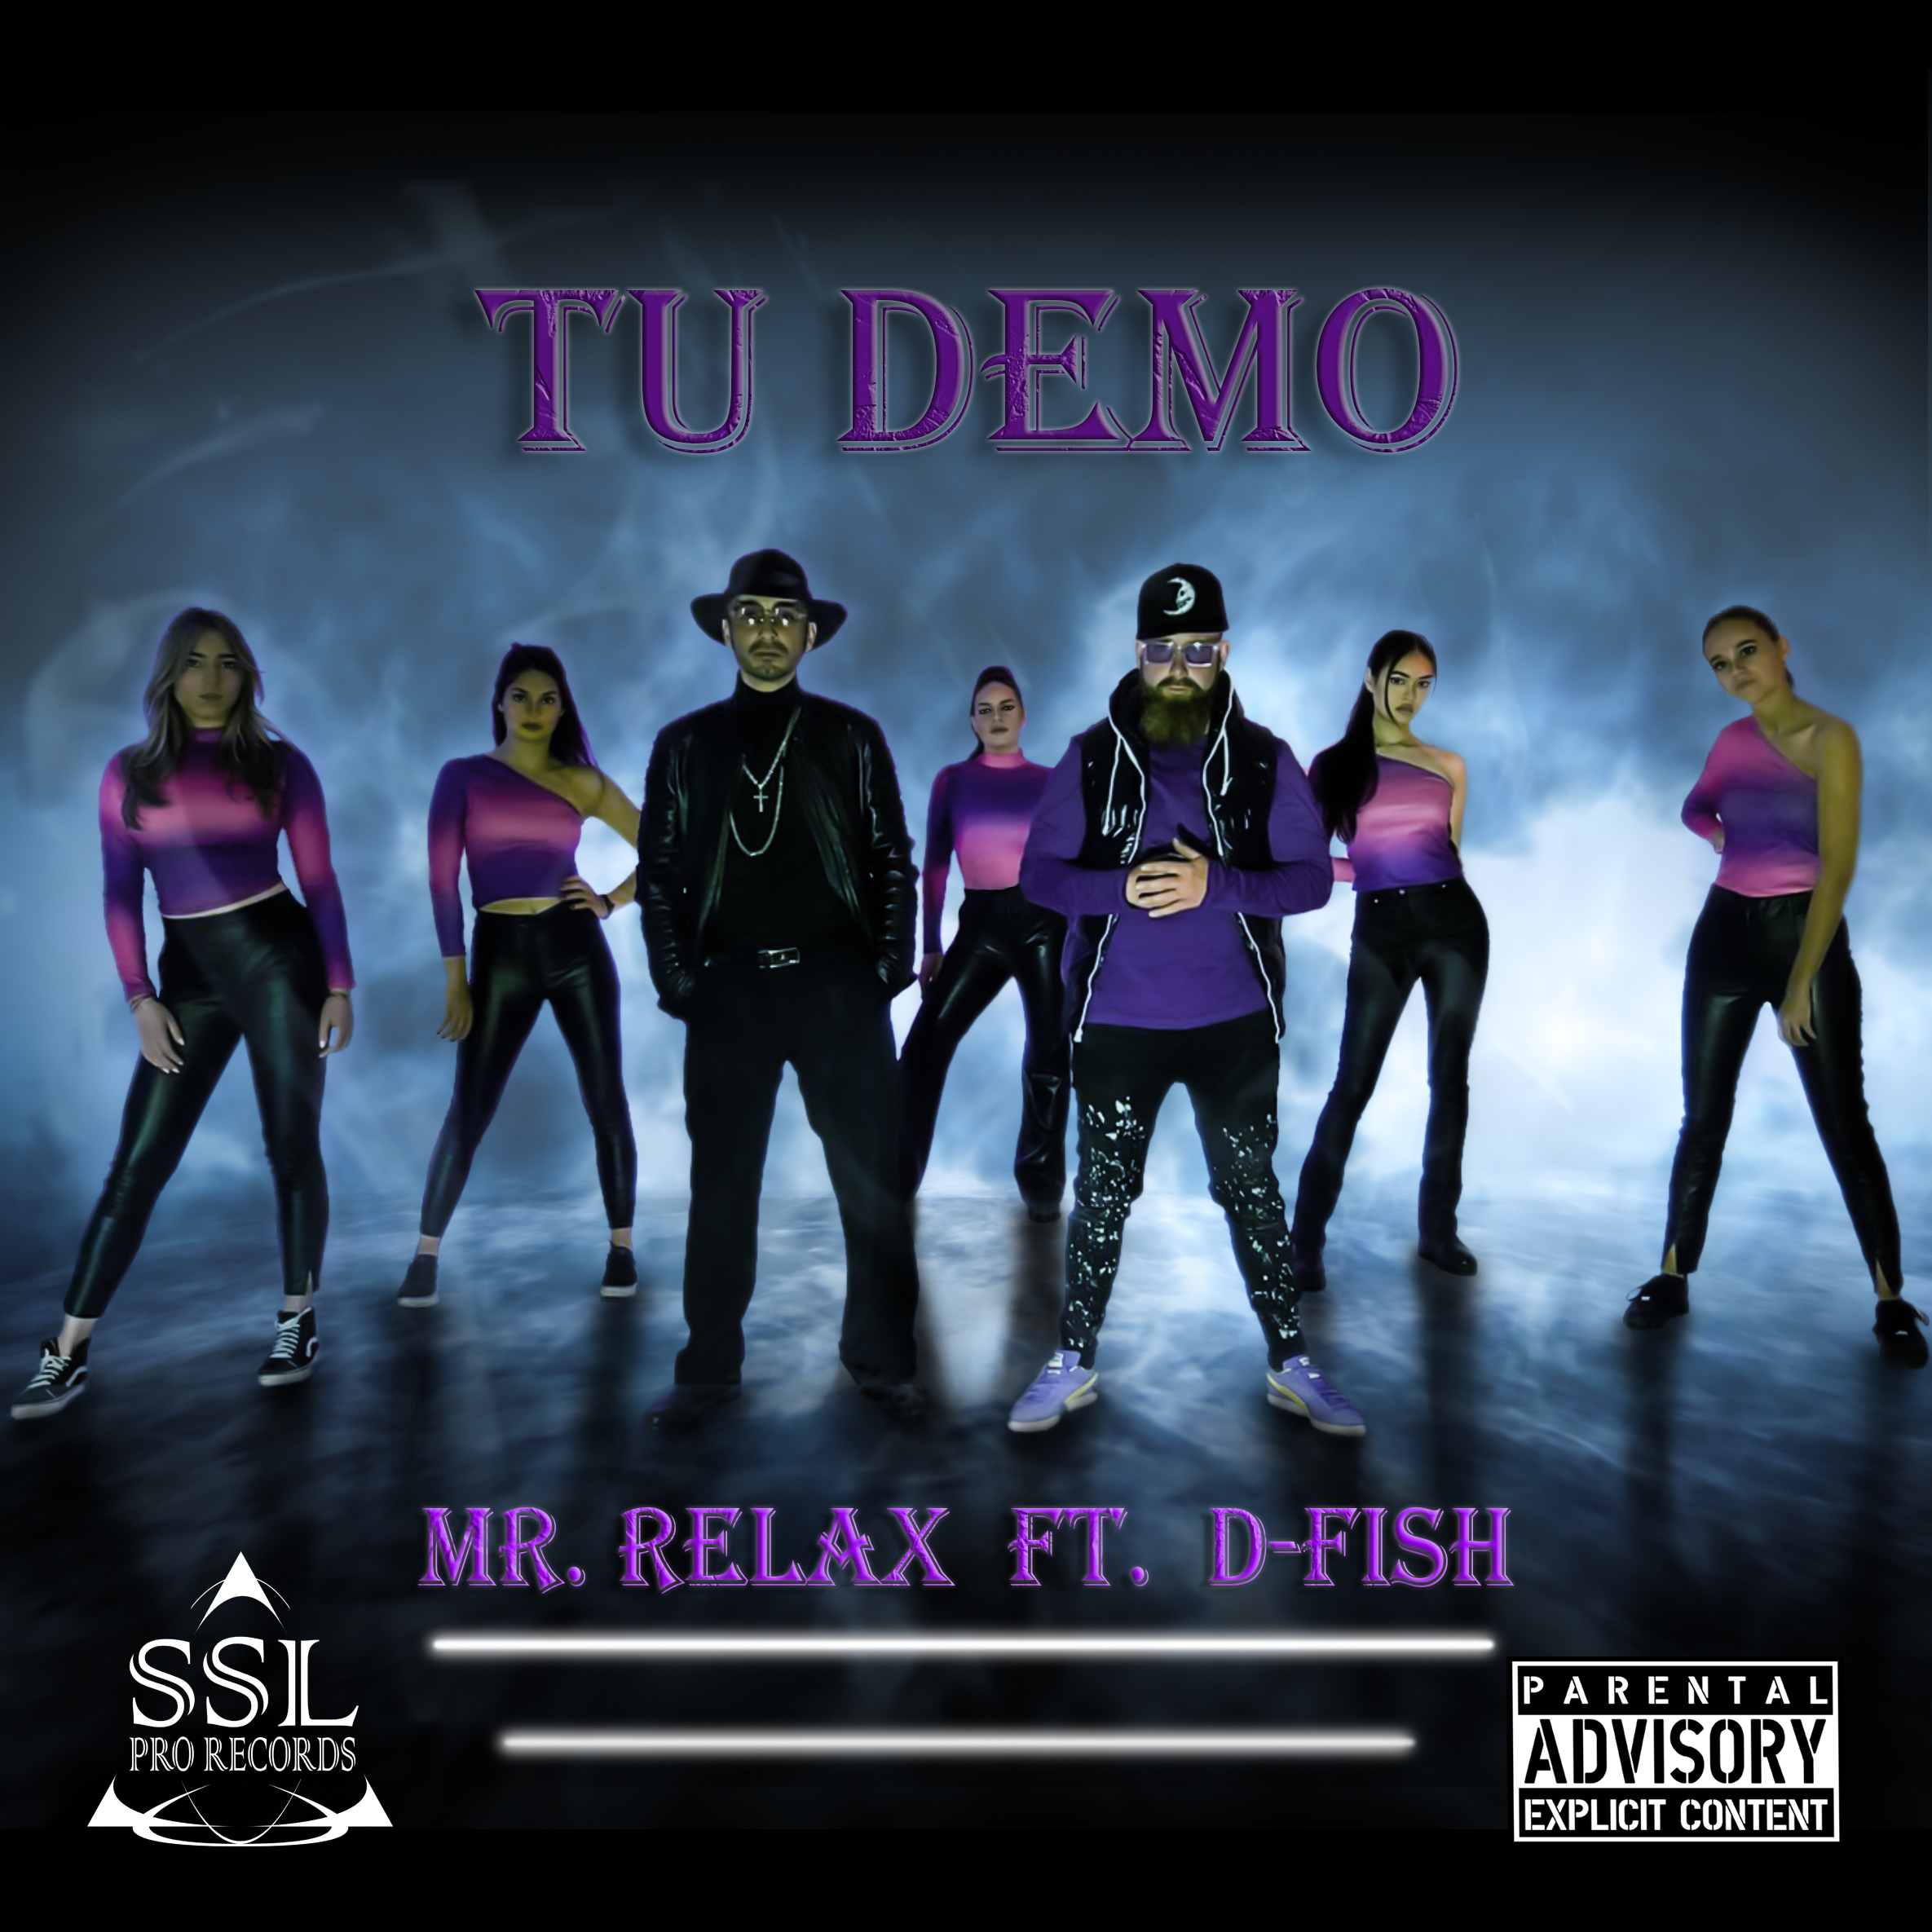 Mr Relax ft D-fish